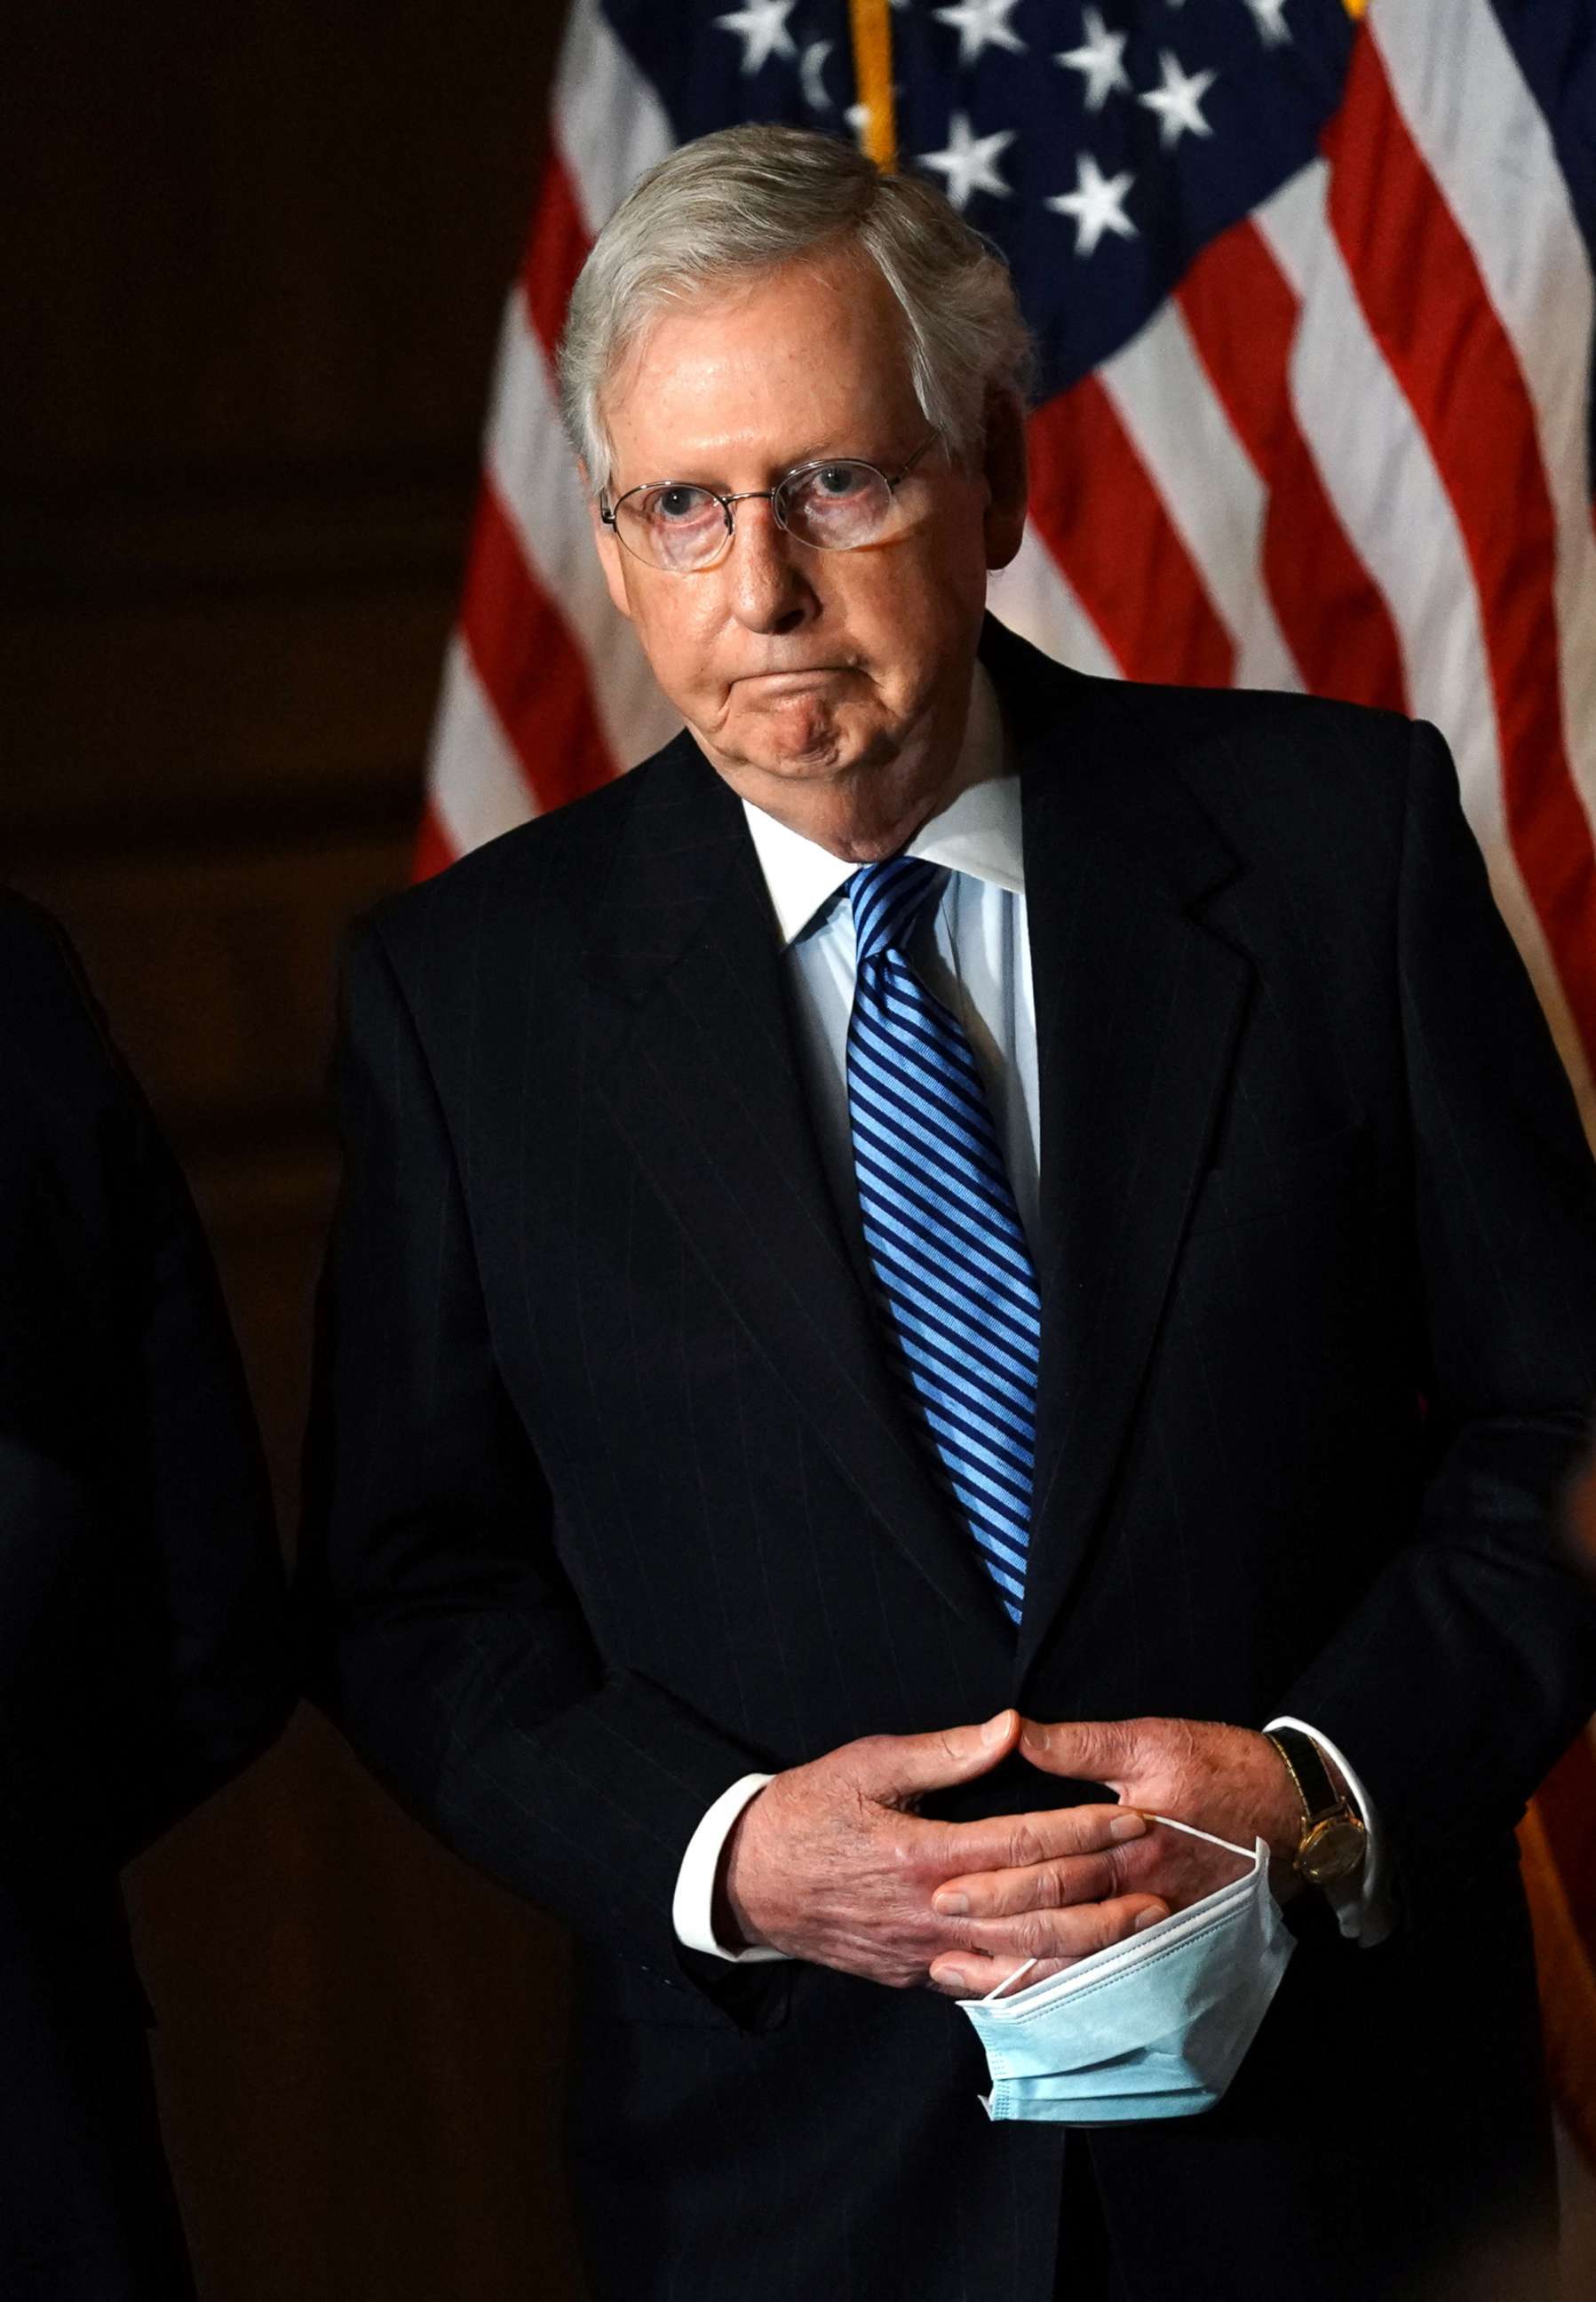 PHOTO: Senate Majority Leader Mitch McConnell listens to a reporters question during a press conference with Republican leaders at the U.S. Capitol Building in Washington, DC., Dec. 8, 2020.